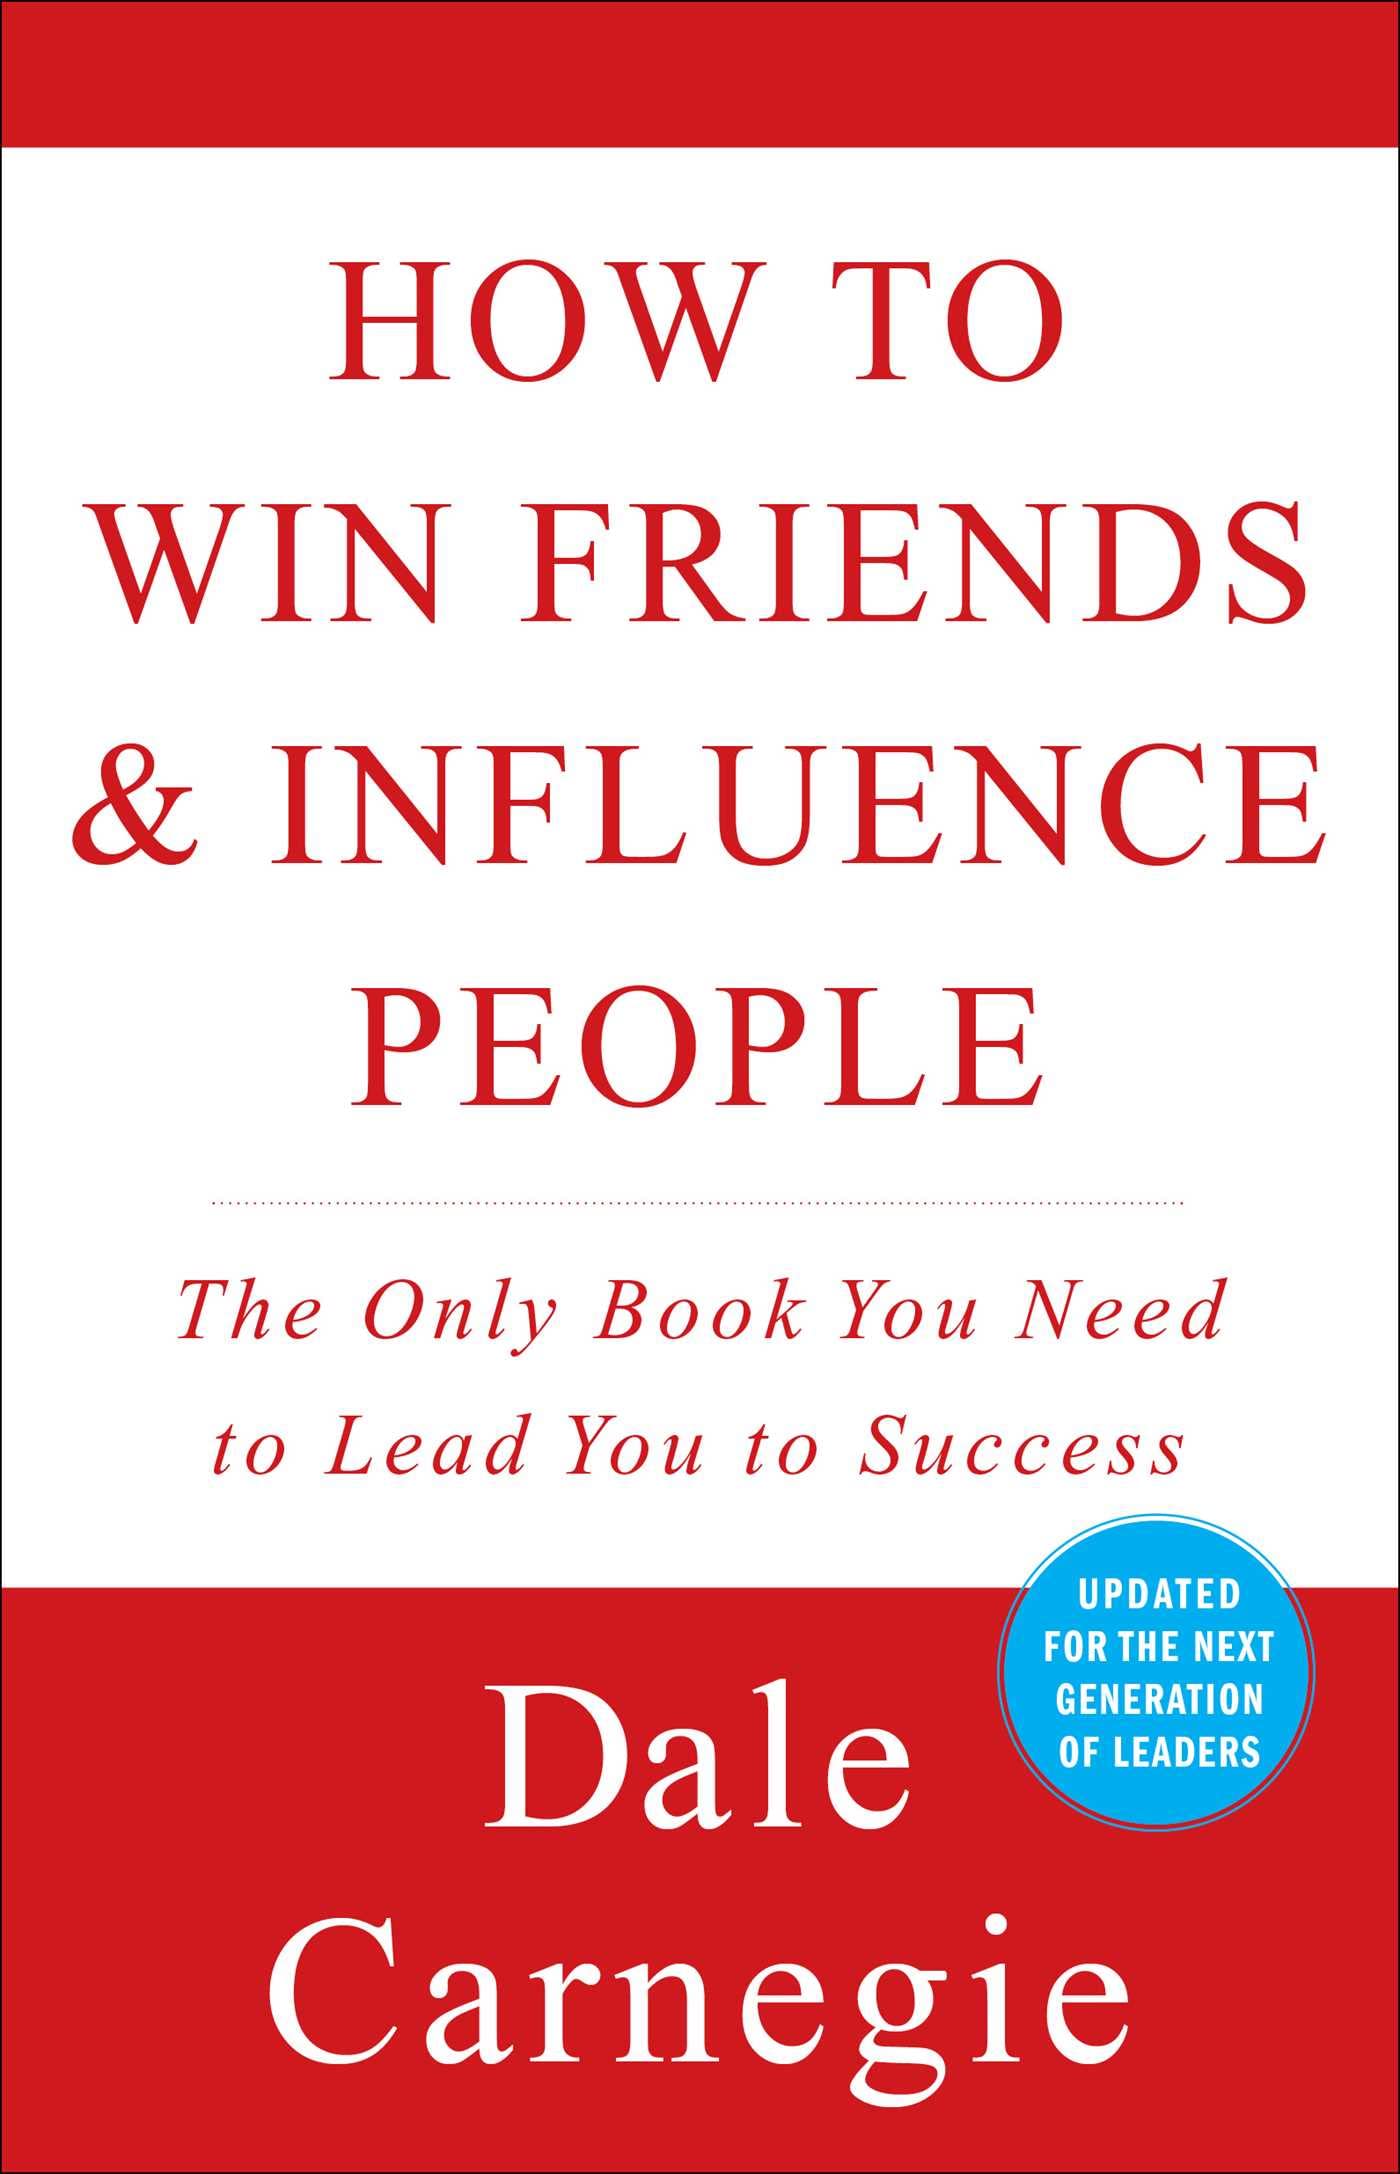 How-to-Win-Friends-&-Influence-People-by-Dale-Carnegie